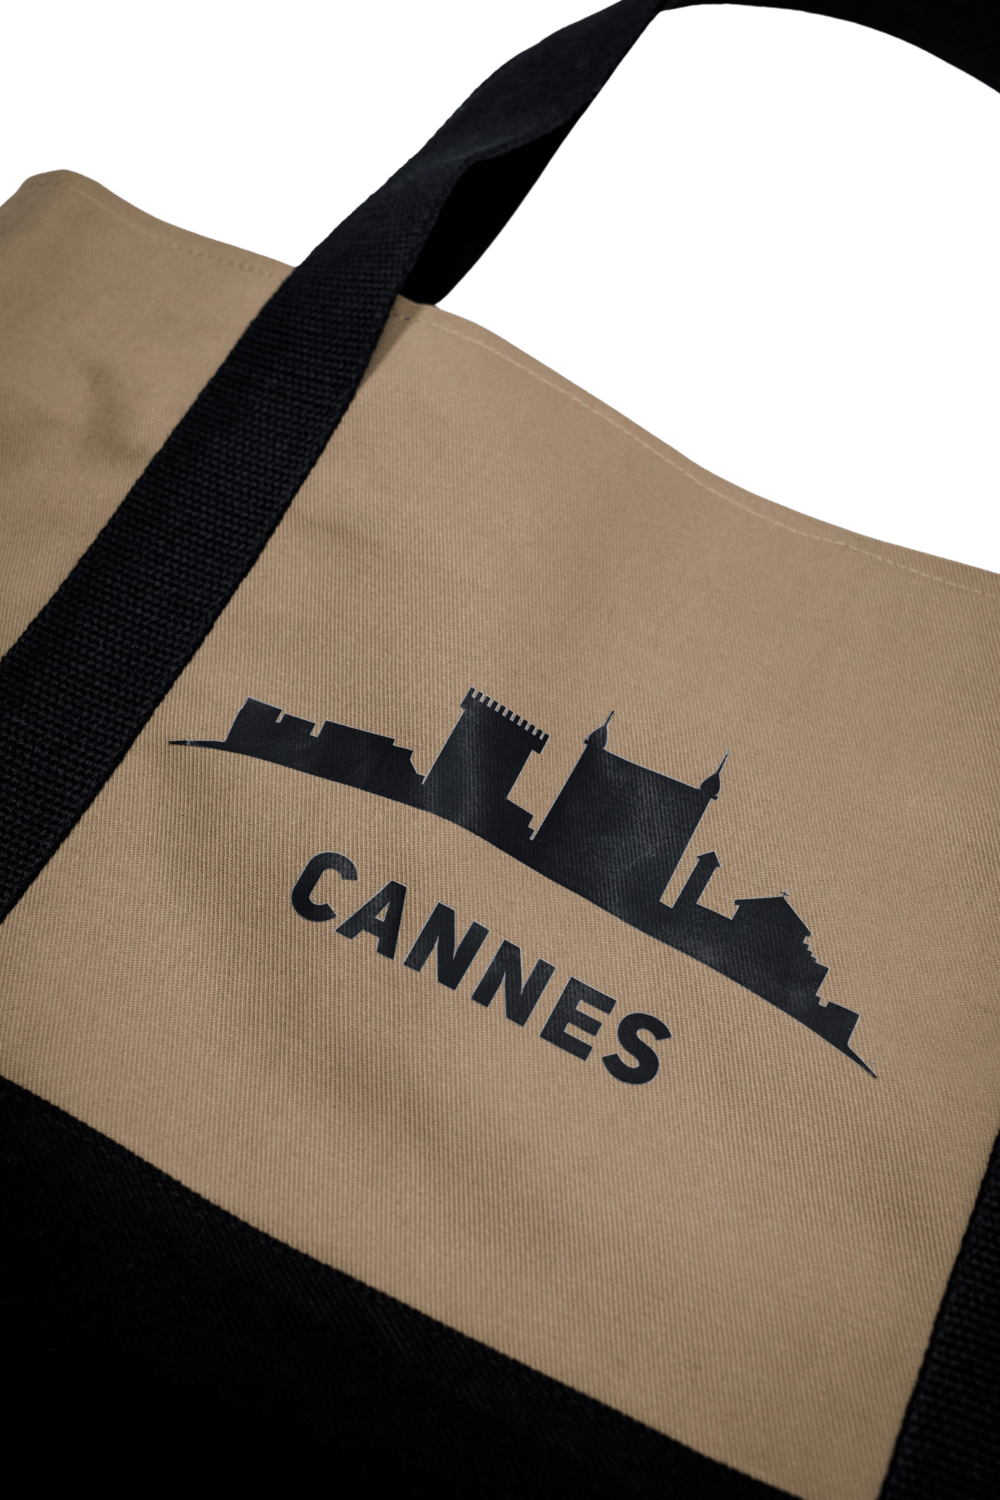 Cotton ecological shopping bag black Cannes 05S03